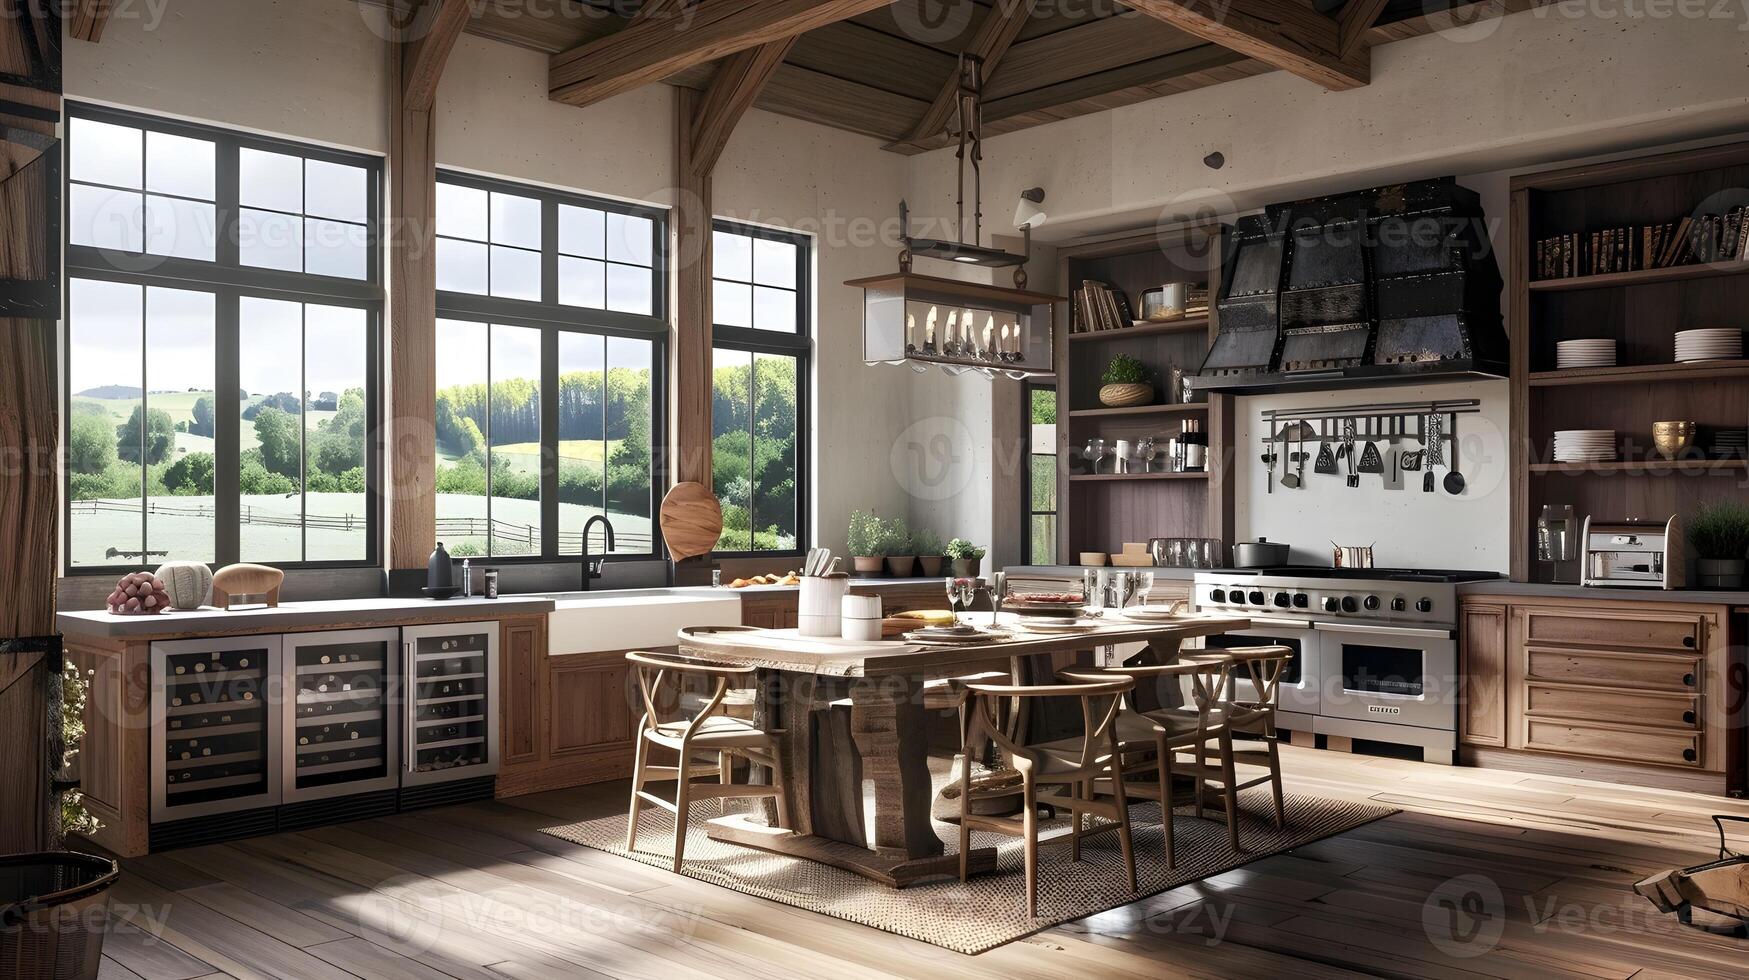 Rustic Farmhouse Kitchen with Wide Windows and Island, Showcasing Vintage-Inspired Appliances and Charming Dining Area photo